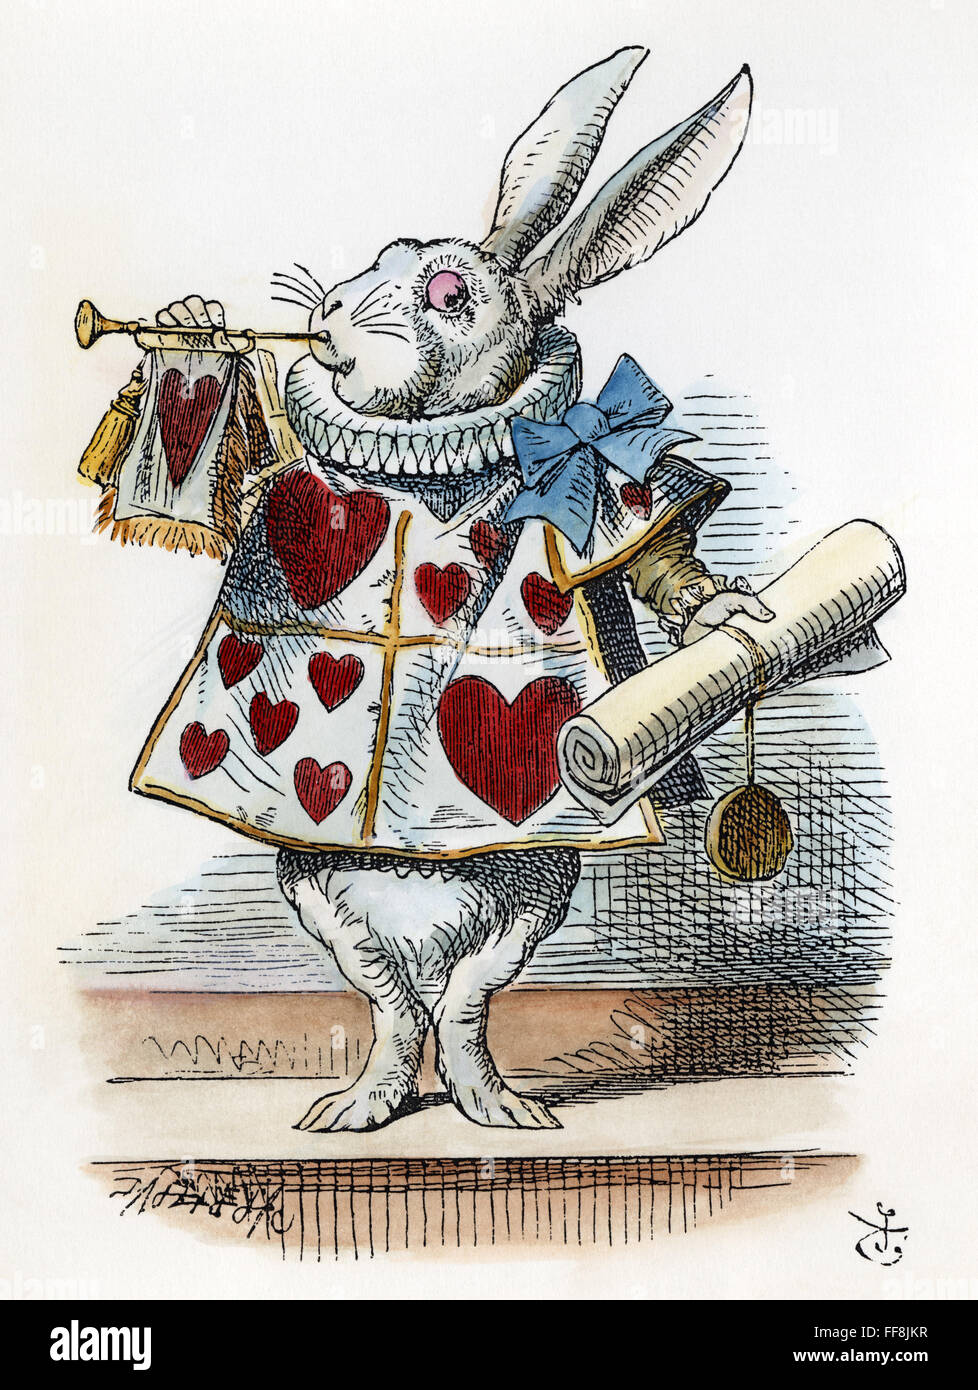 CARROLL: ALICE, 1865. /nThe White Rabbit as Herald at the trial. After the design by Sir John Tenniel for the first edition of Lewis Carroll's 'Alice's Adventures in Wonderland'. Stock Photo